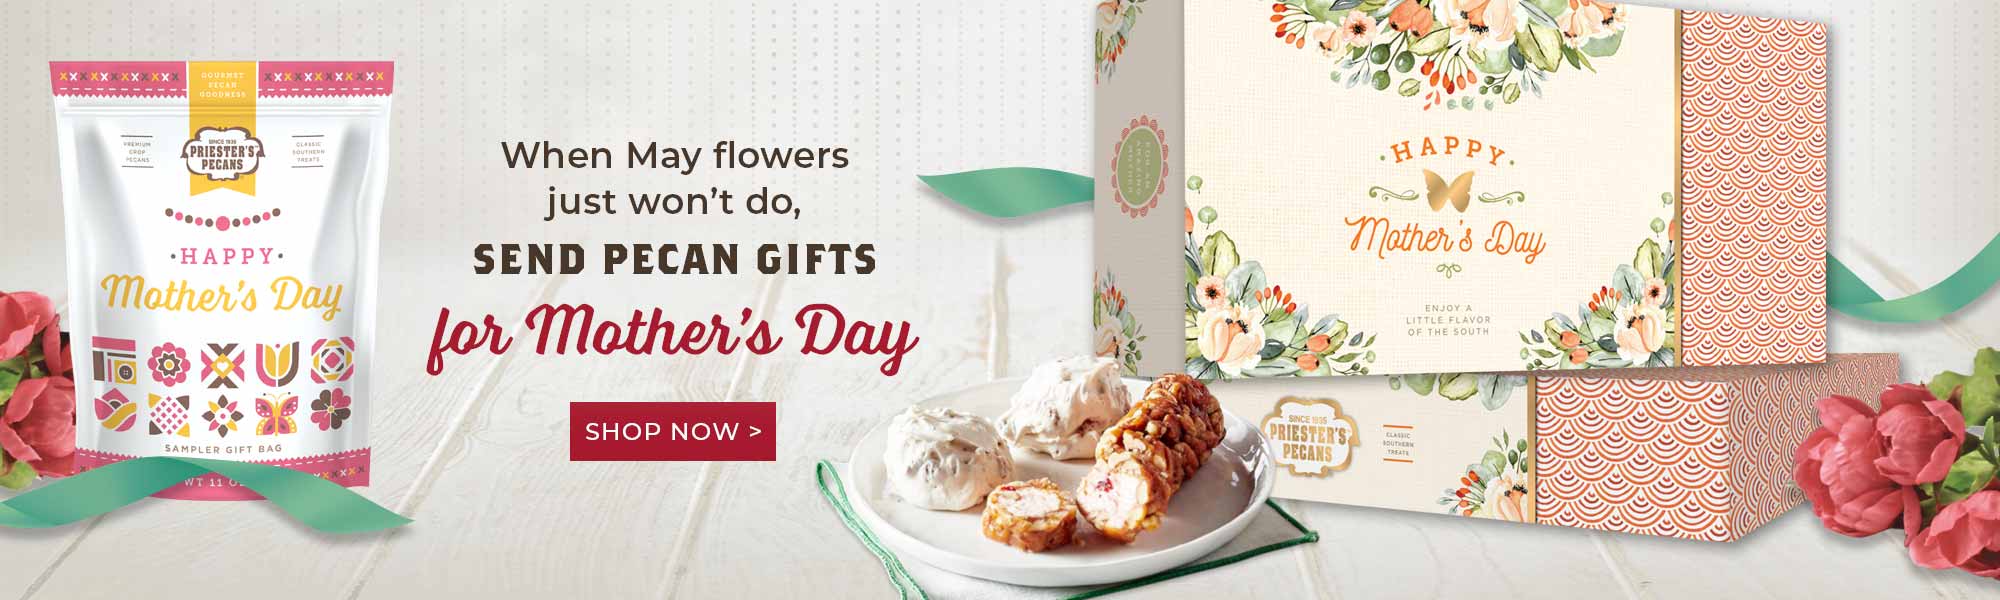 When May flowers just won't do, SEND PECAN GIFTS for Mother's Day